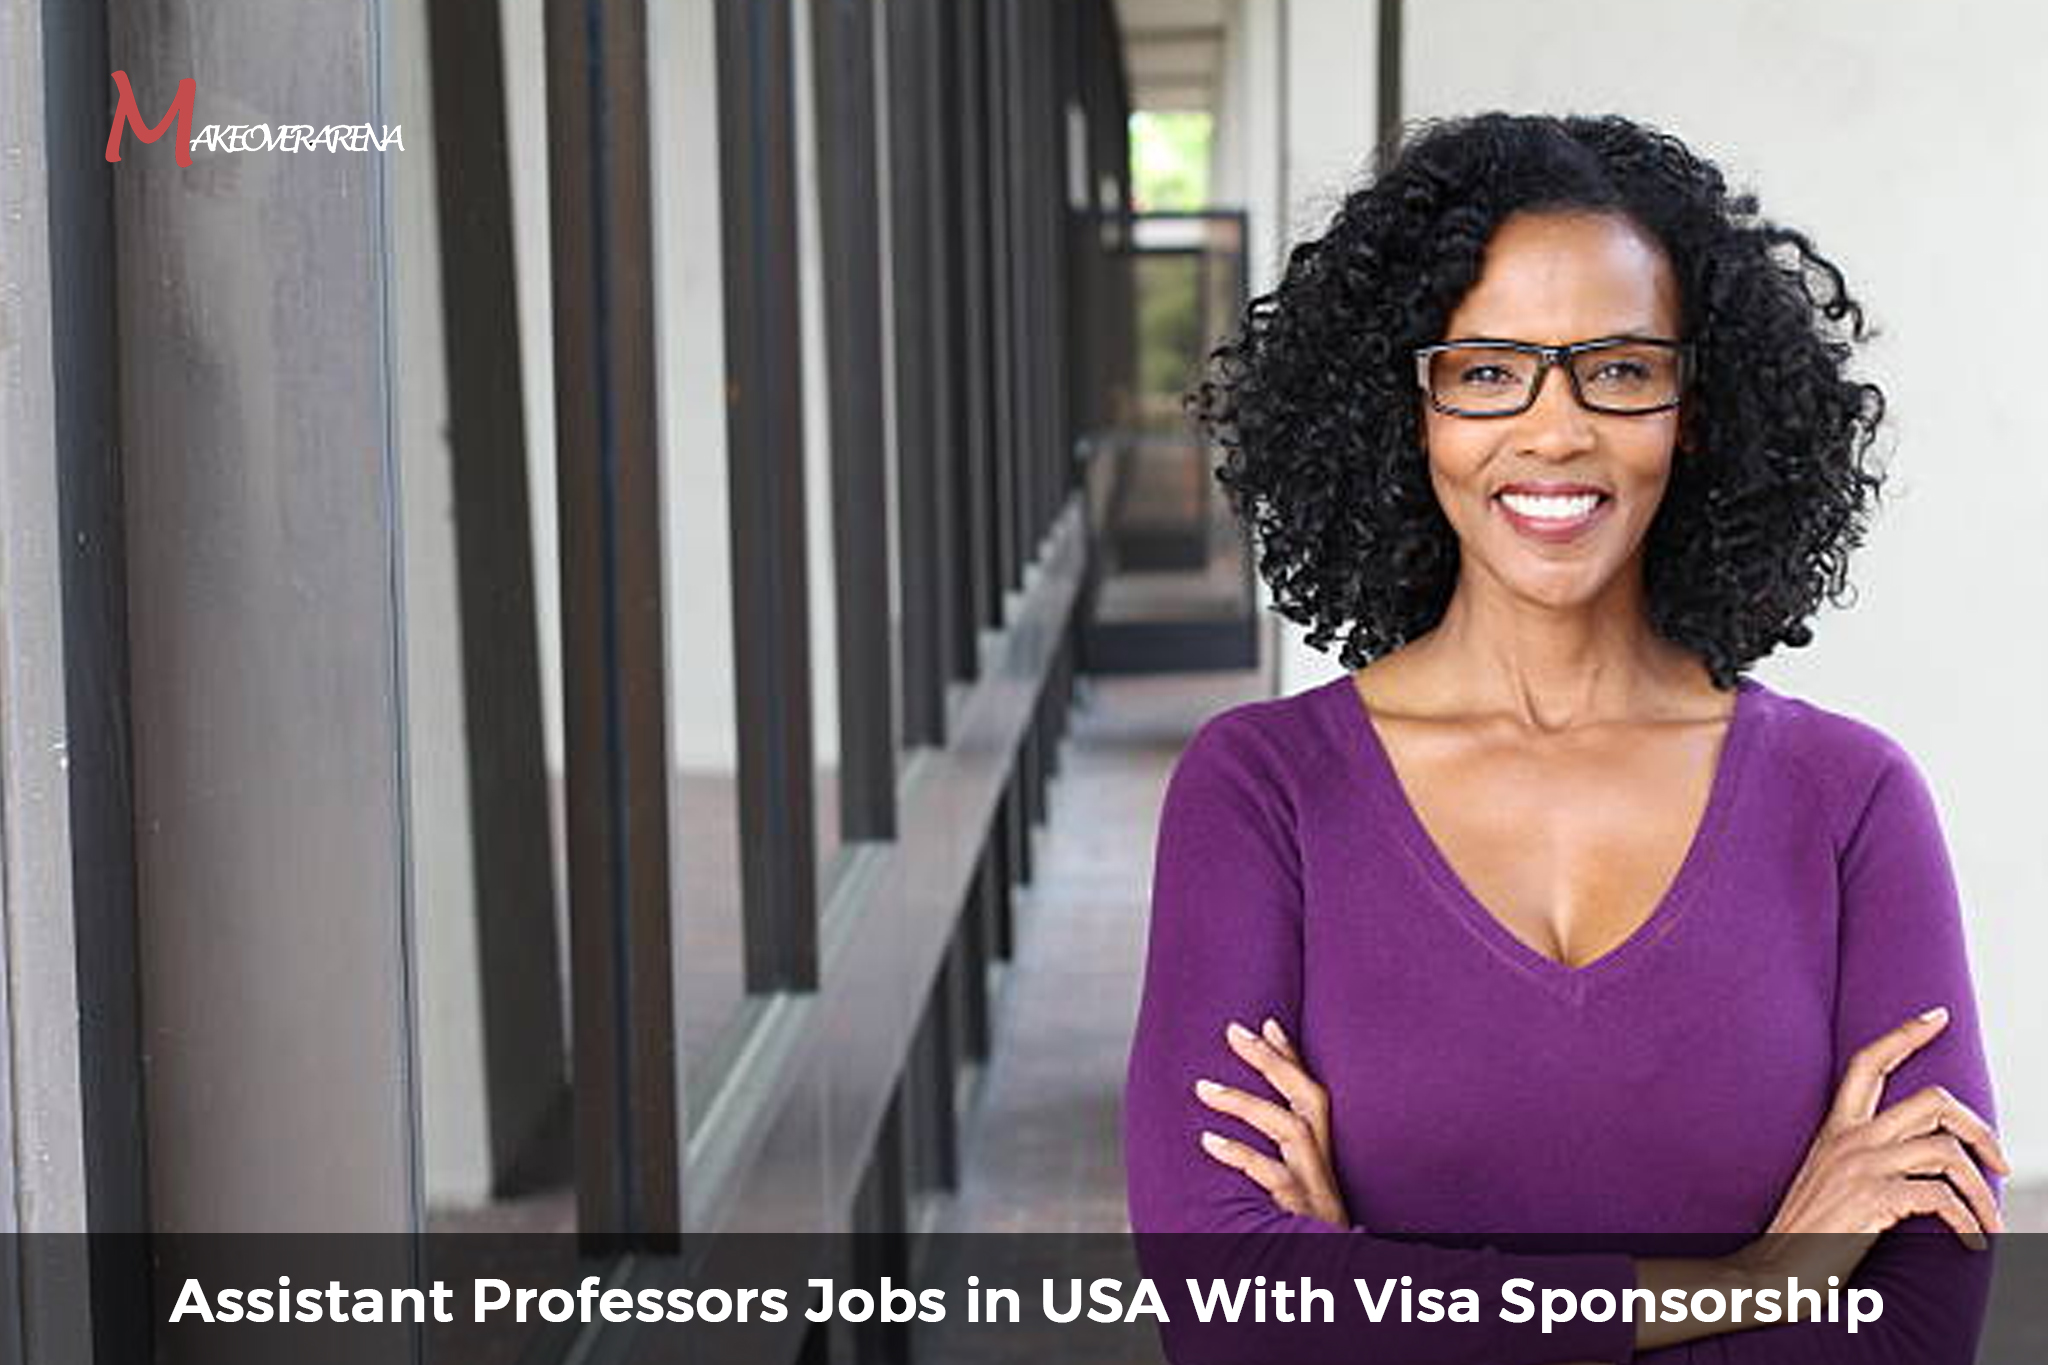 Assistant Professors Jobs in USA With Visa Sponsorship